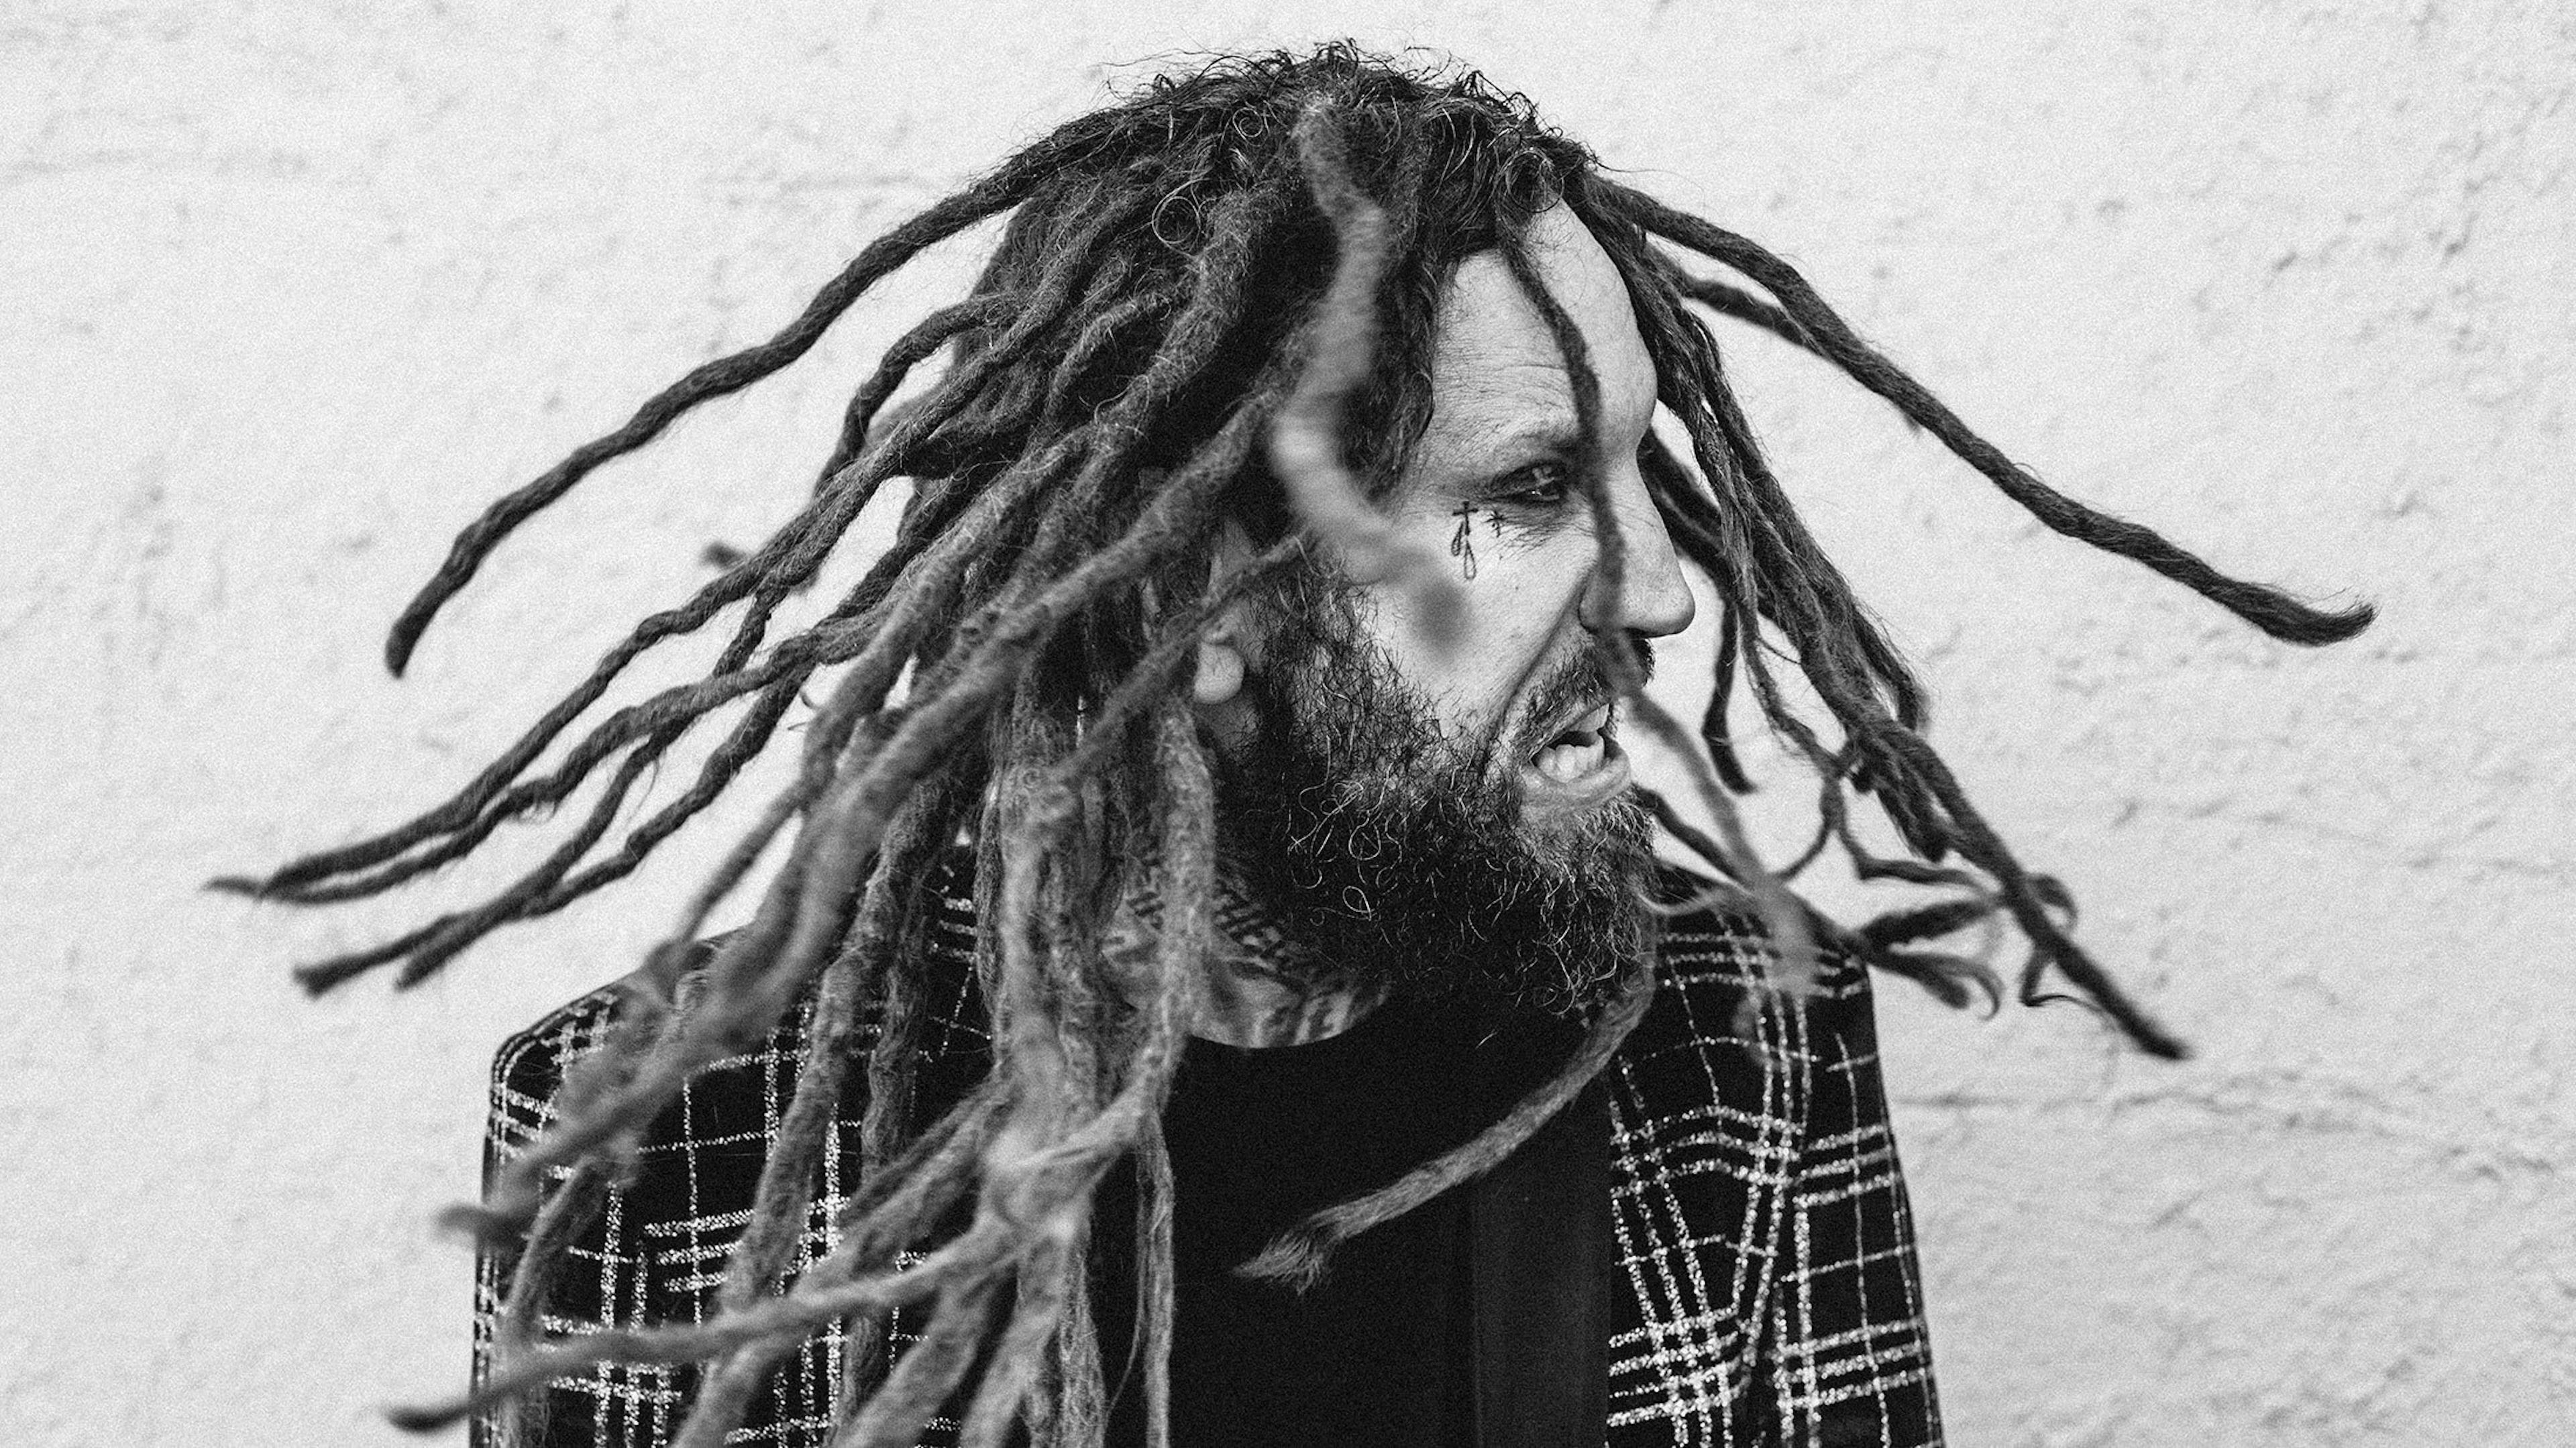 Brian ‘Head’ Welch: “I struggled with my thoughts, I struggled with my looks, so I found things to help me like comedy and music”